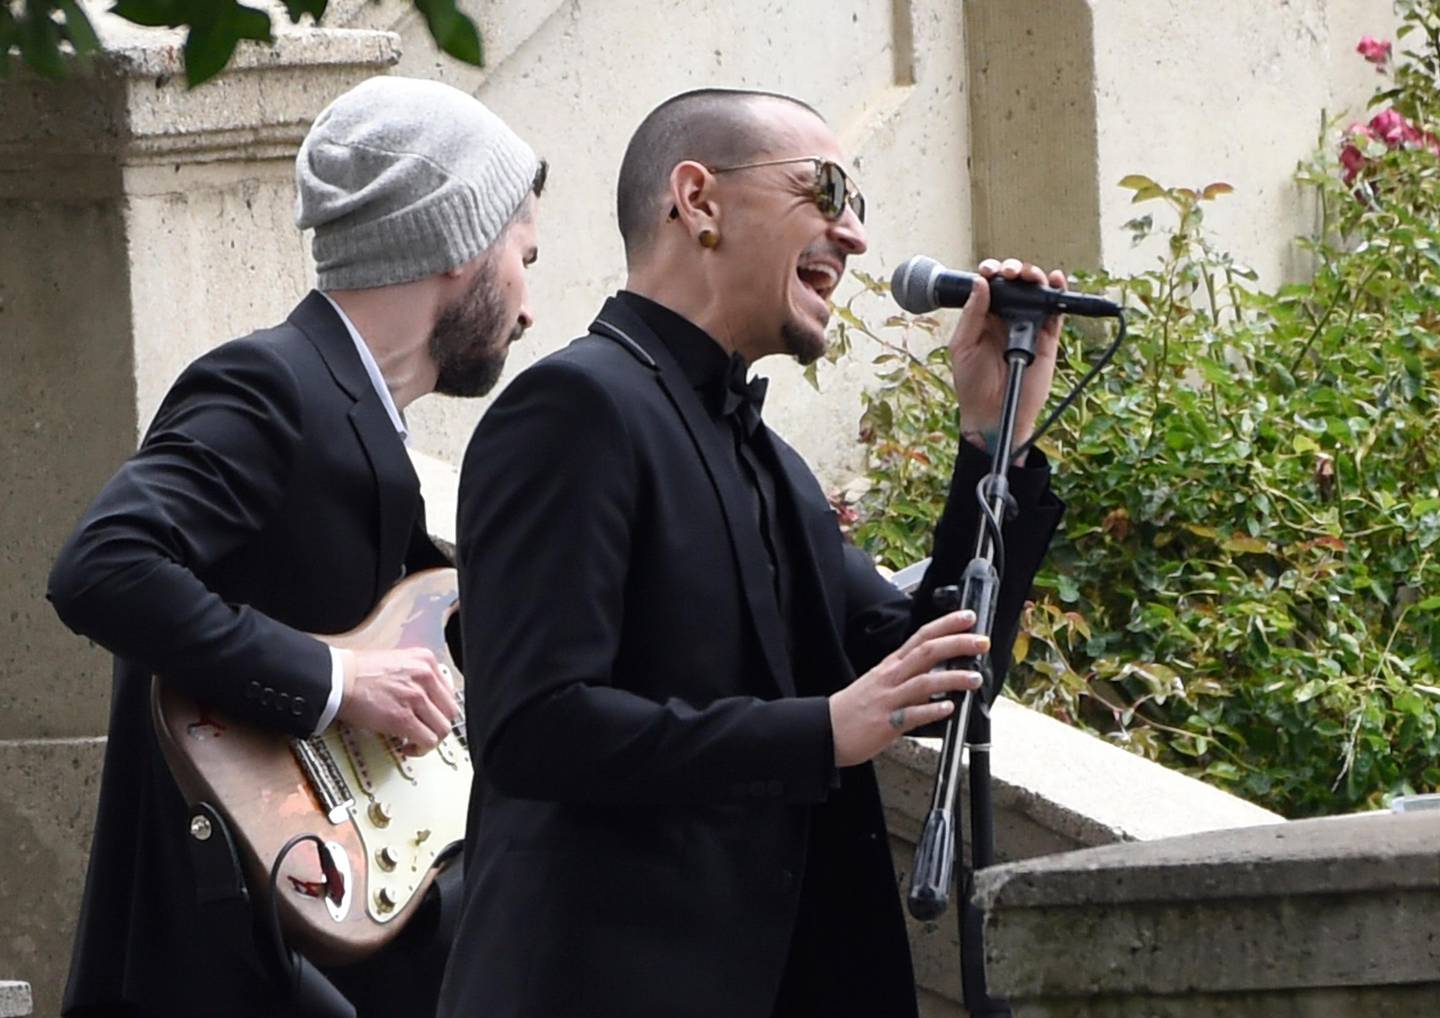 FILE - In this May 26, 2017 file photo, Chester Bennington, of Linkin Park, performs "Hallelujah" at a funeral for Chris Cornell at the Hollywood Forever Cemetery in Los Angeles. The Los Angeles County coroner says Bennington, who sold millions of albums with a unique mix of rock, hip-hop and rap, has died in his home near Los Angeles. He was 41. Coroner spokesman Brian Elias says they are investigating Benningtonâ€™s death as an apparent suicide but no additional details are available. (Photo by Chris Pizzello/Invision/AP, File)